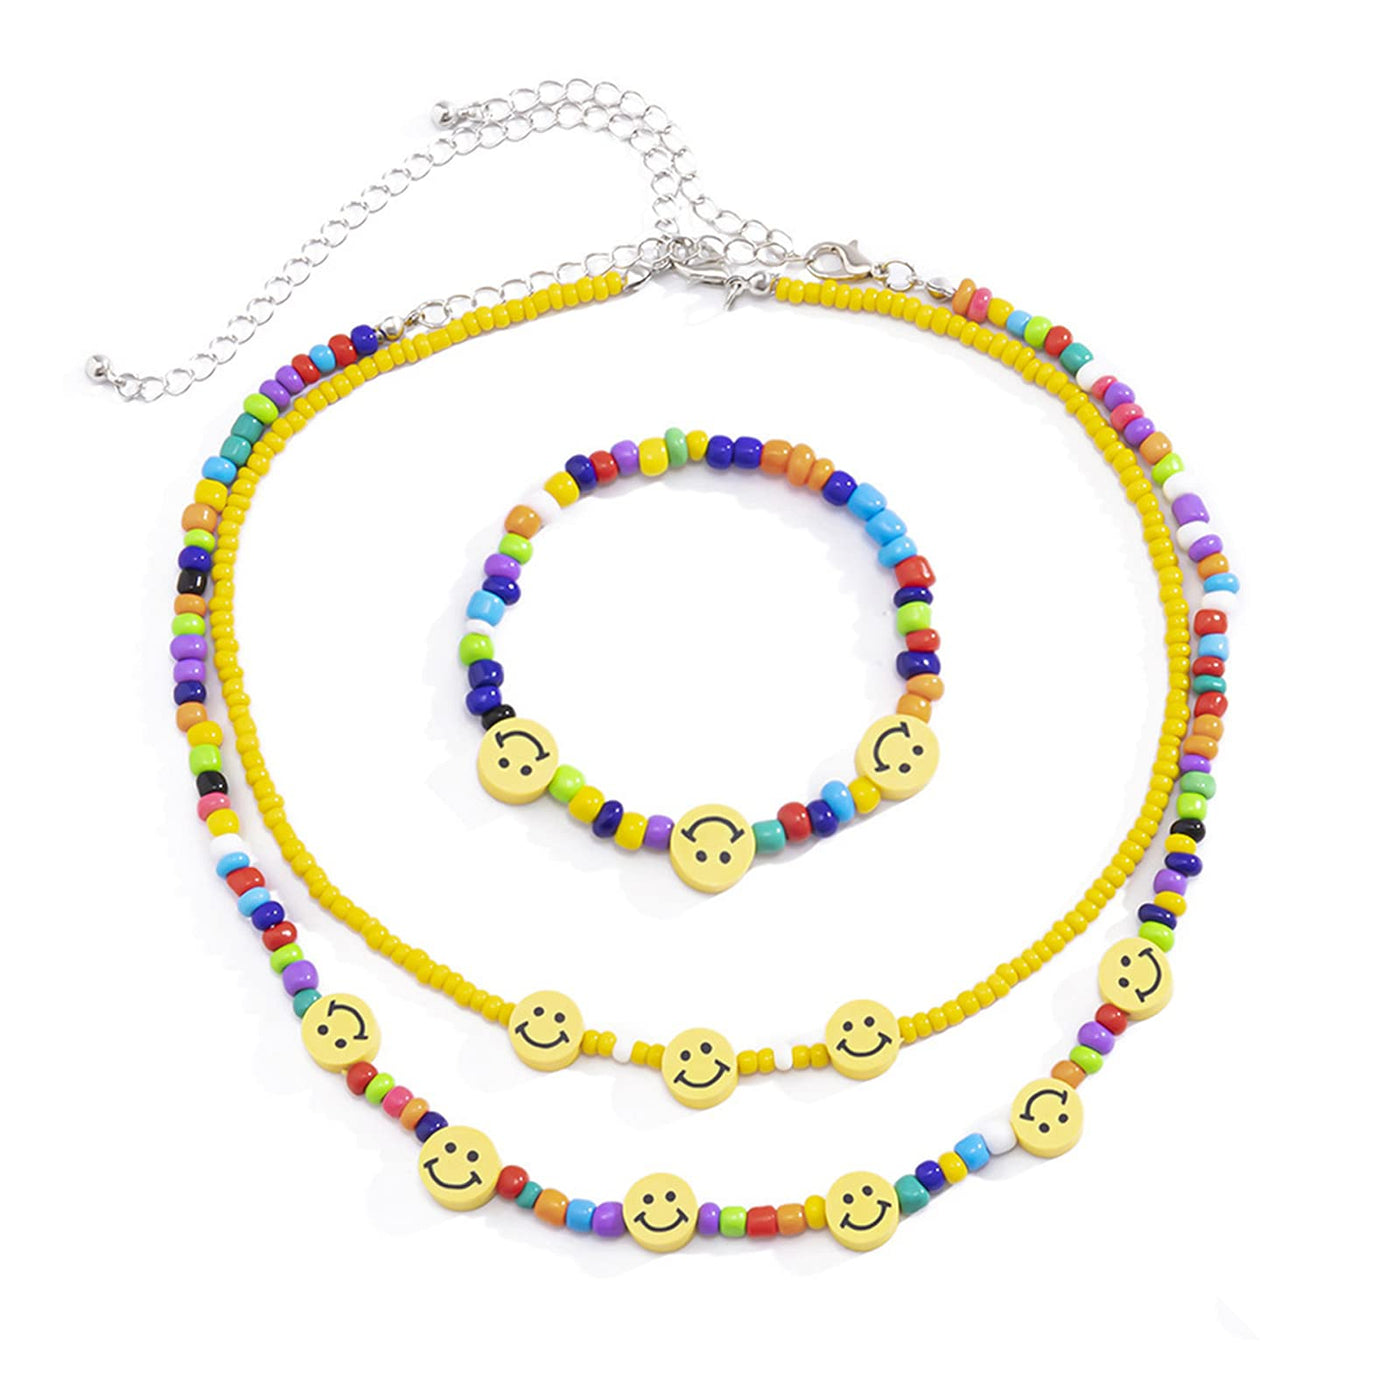 TseanYi Boho Necklace Smiley Face Pendant Handmade Fashion Color Rice Bead  Necklace Jewelry for Women and Girls : Amazon.in: Jewellery